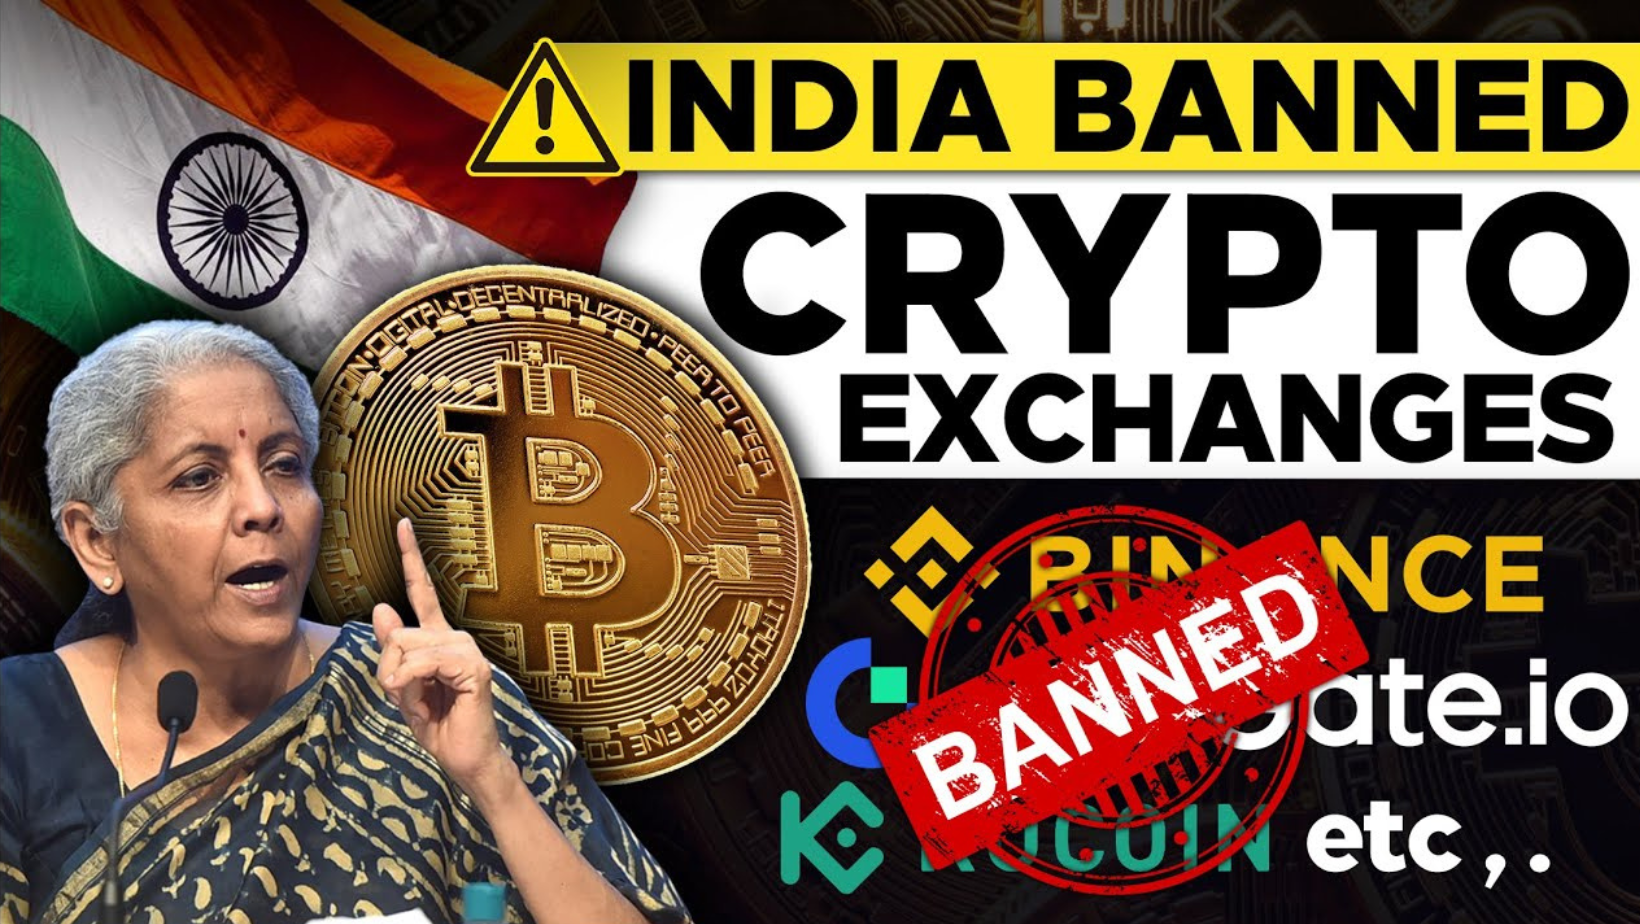 India’s Bold Move: Government Bans Foreign Cryptocurrency Exchanges, Including Binance and KuCoin